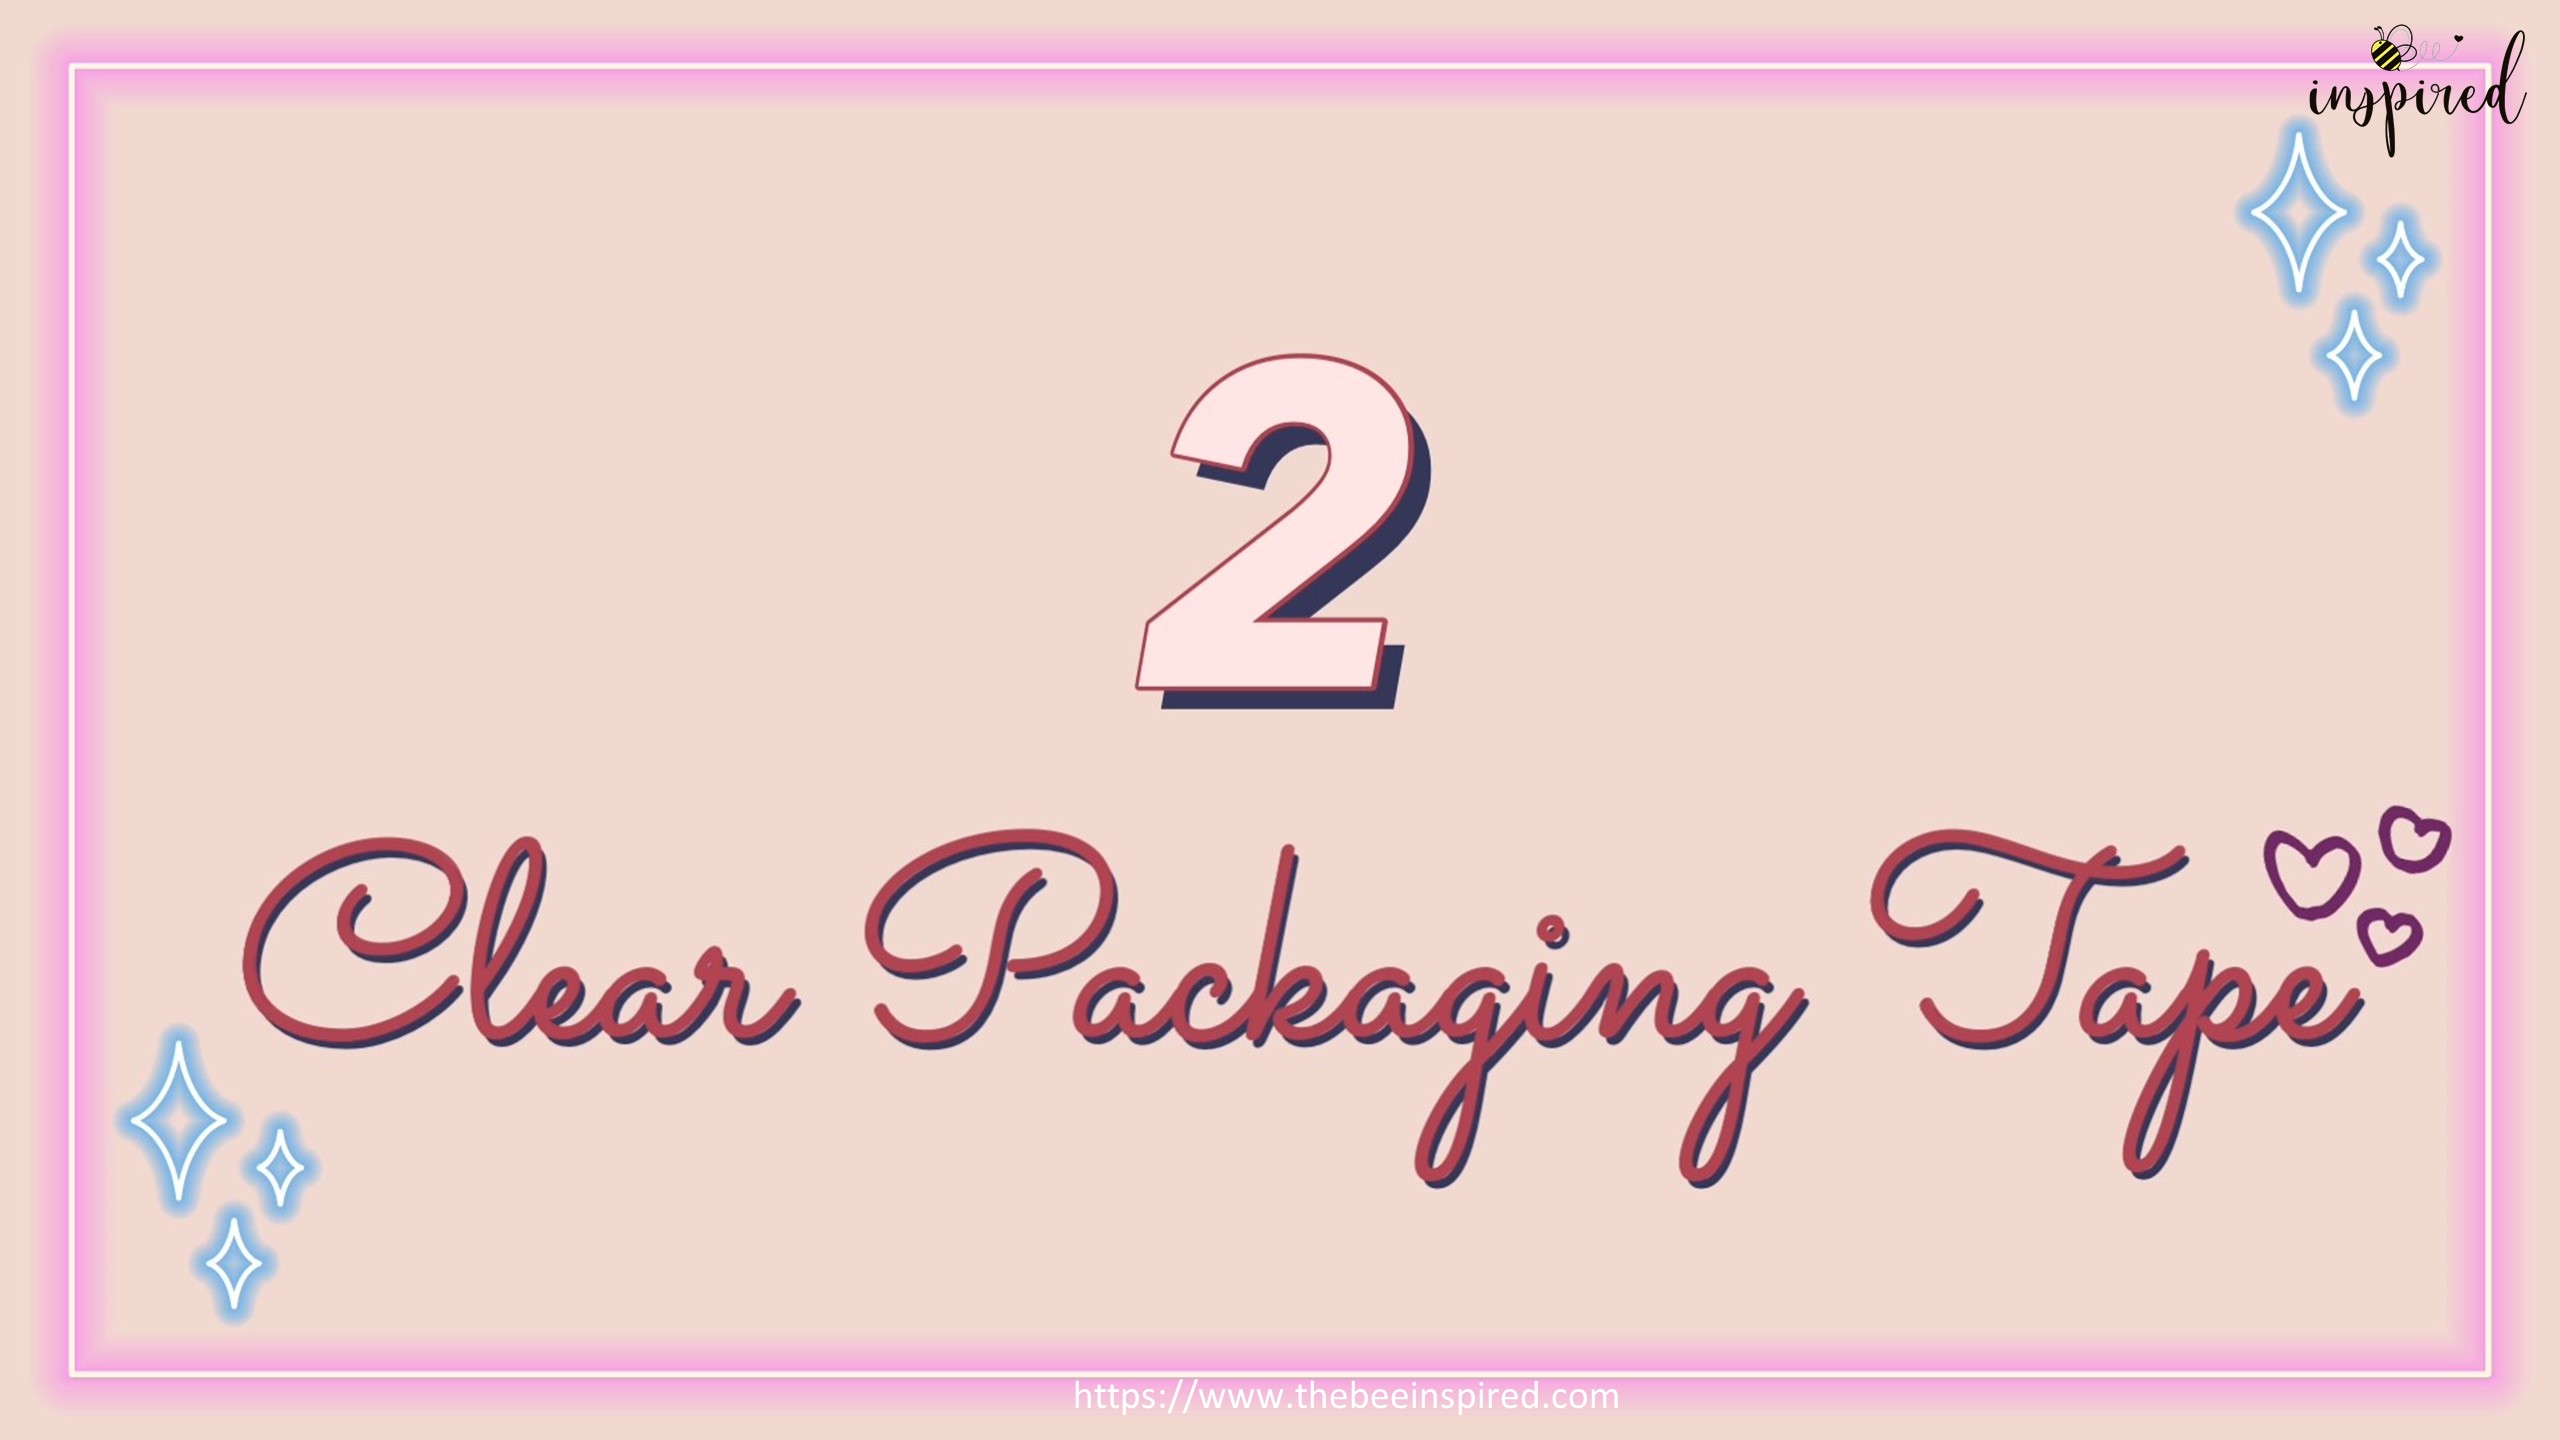 How to Make Downy x Tiny Tan BTS Sticker from Clear Sticker and Clear Packaging Tape_21